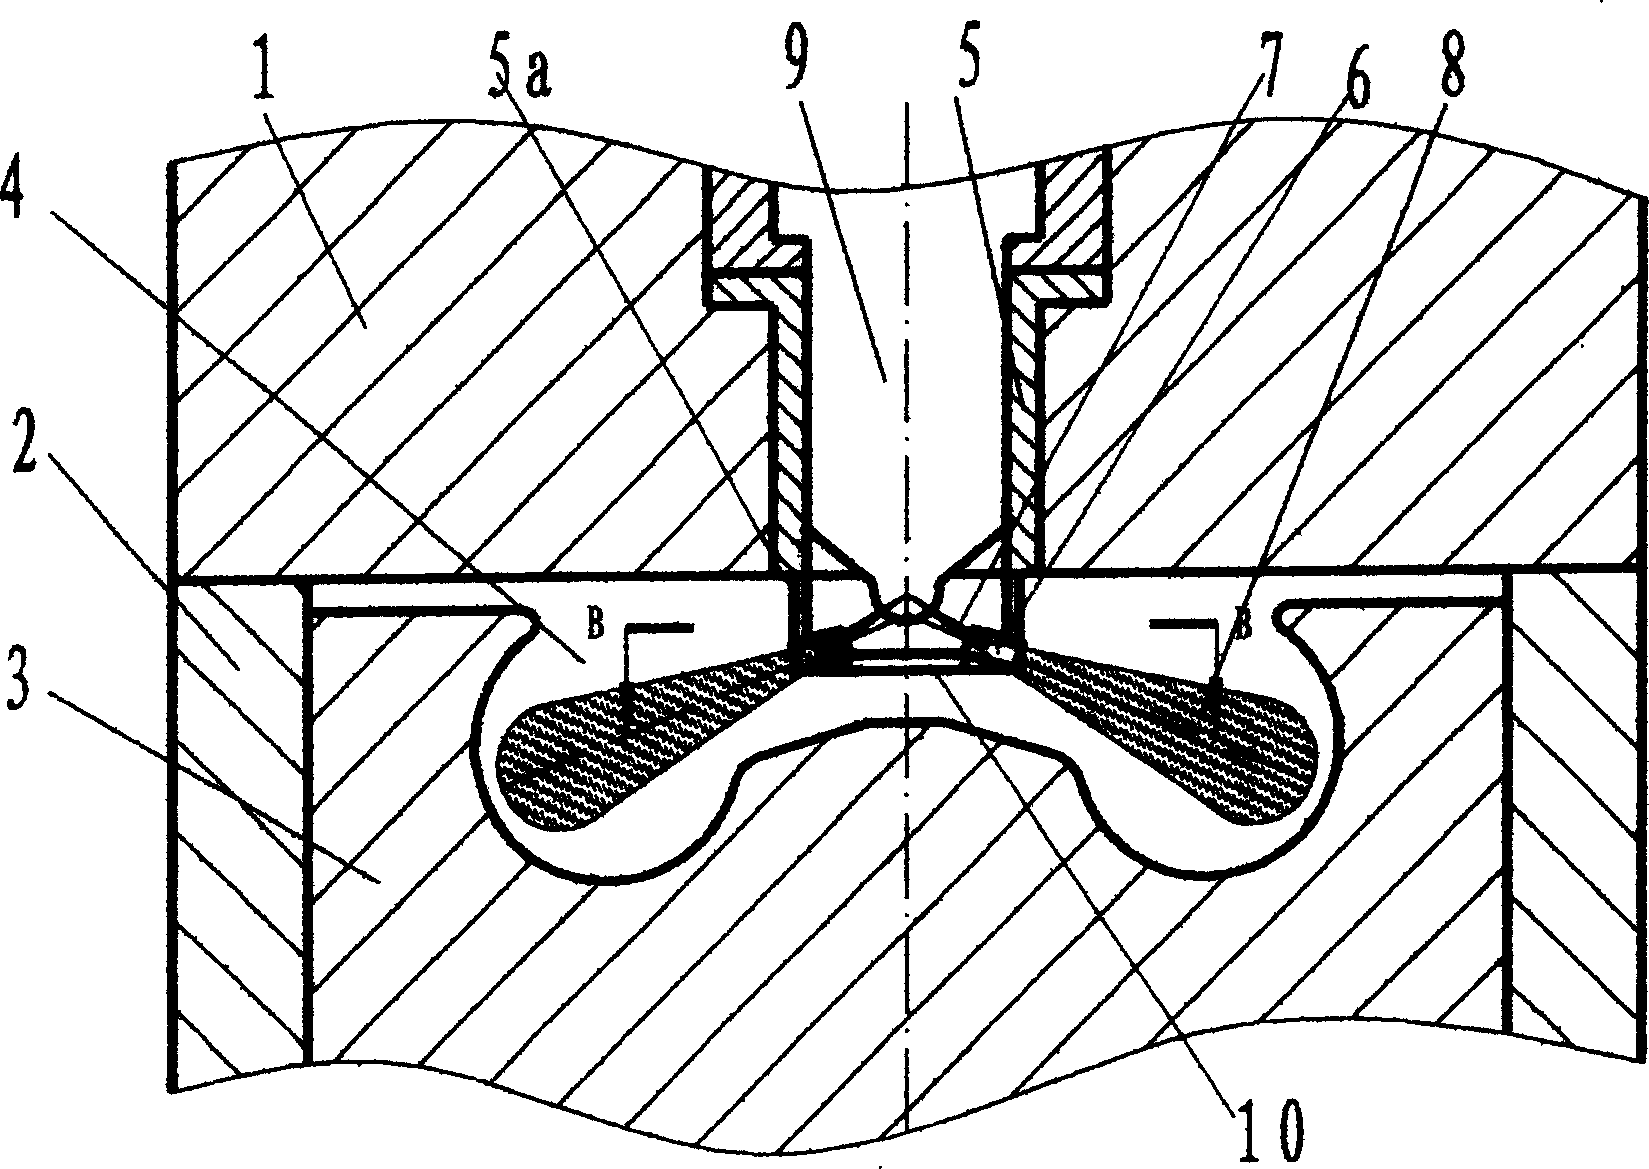 Guide blade combustion system of internal combustion engine